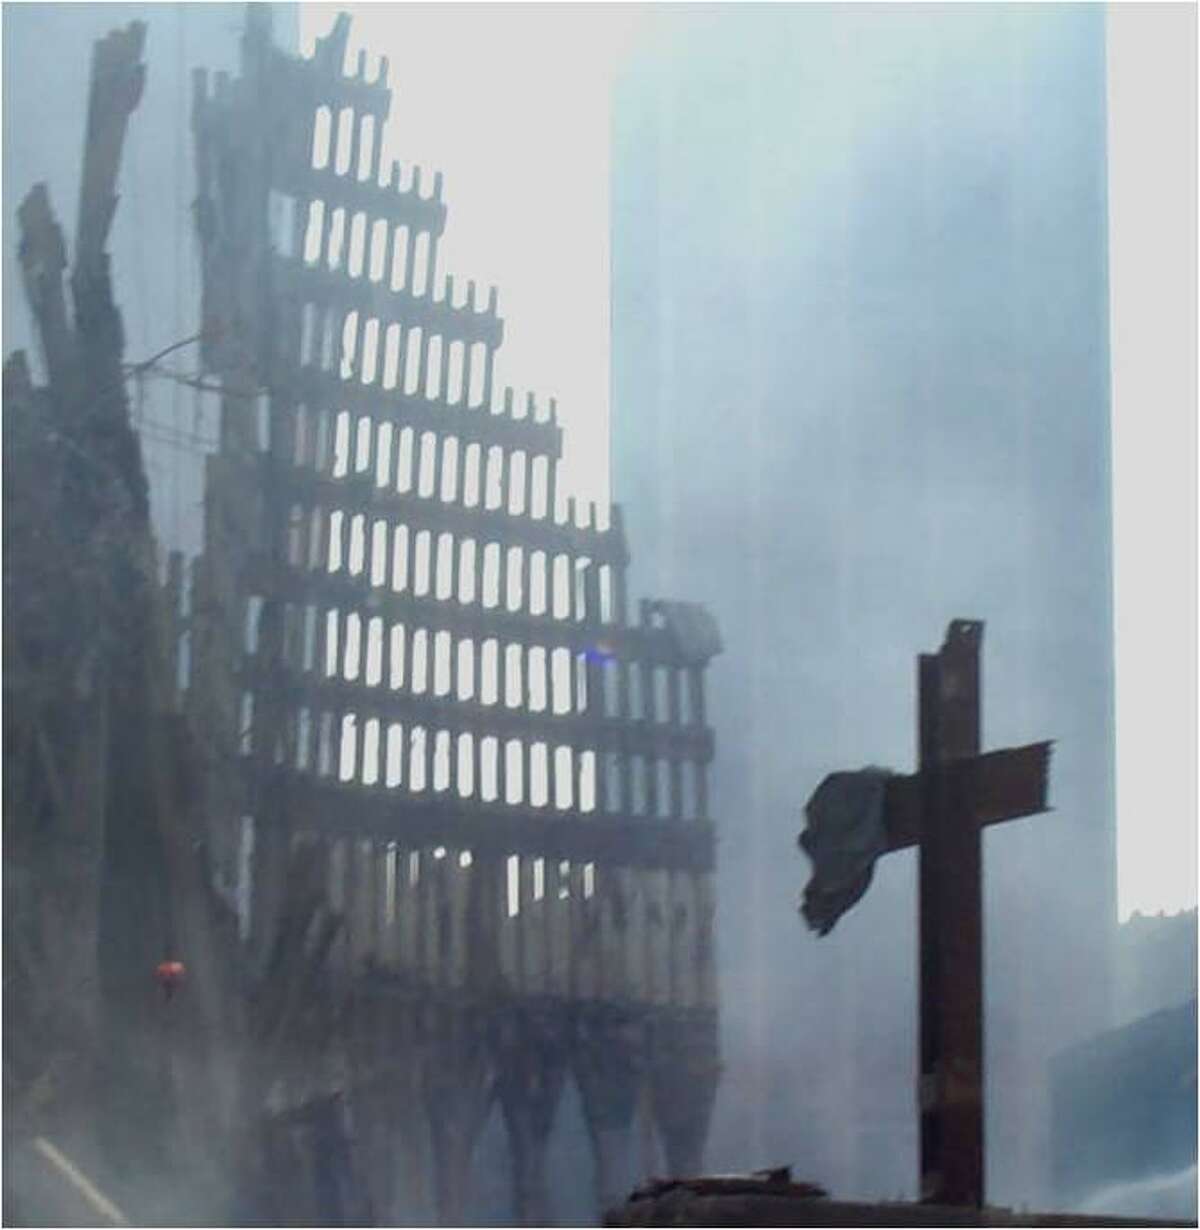 The Ground Zero Cross can be seen amid the devastation of the World Trade Center following the 9/11 attacks in this mid-October 2001 photo.